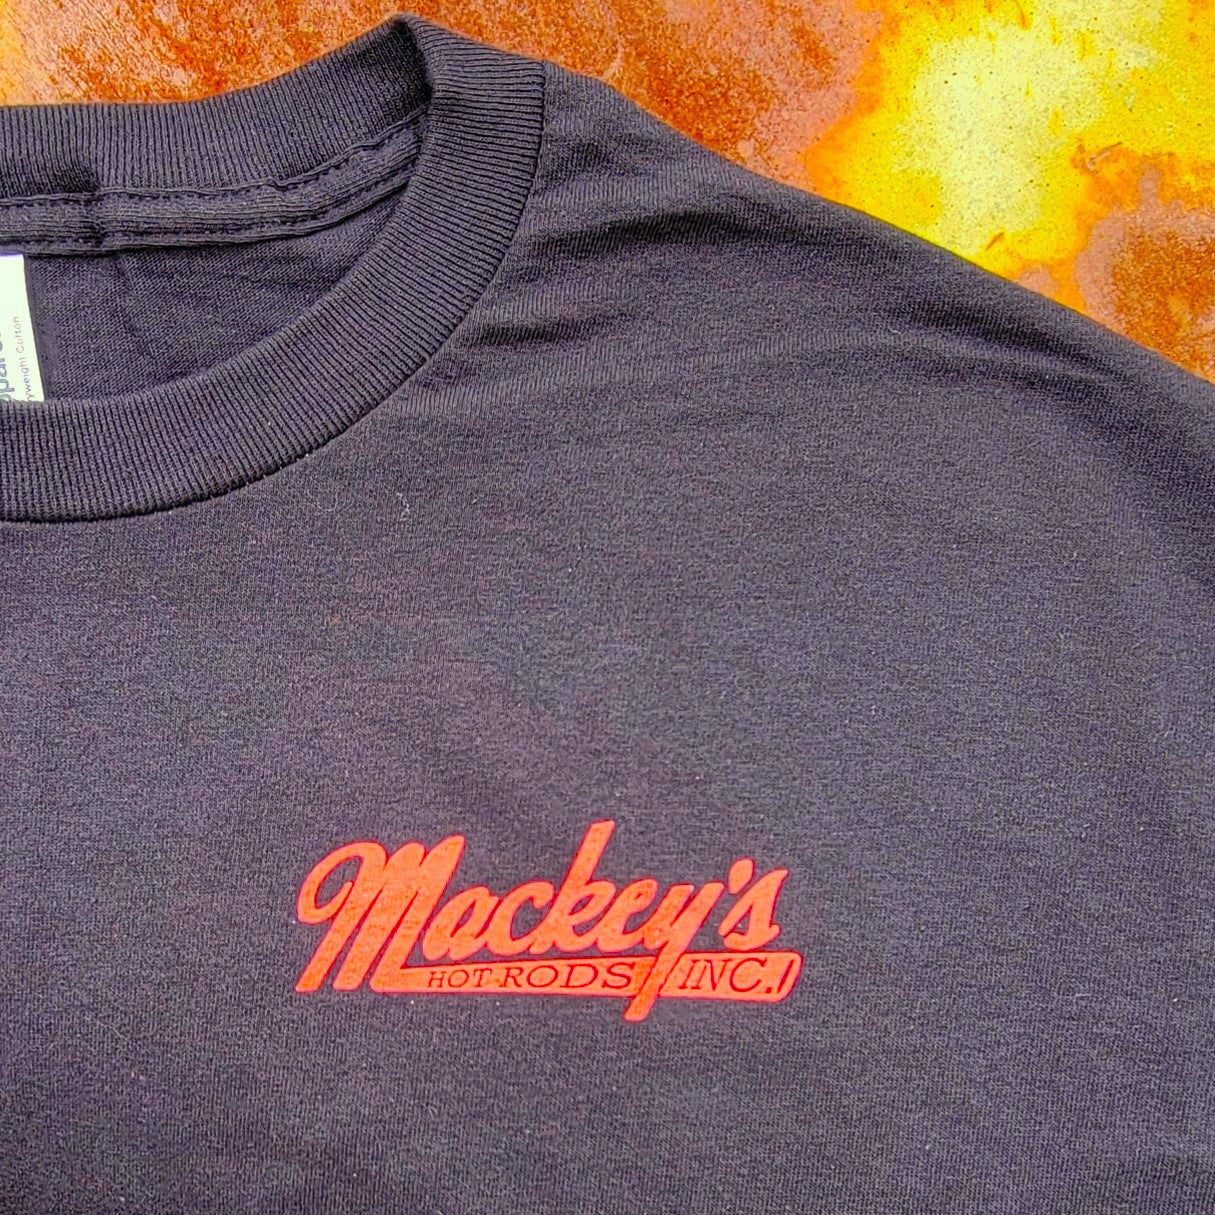 Mackey's Classic Tee in Black and Red